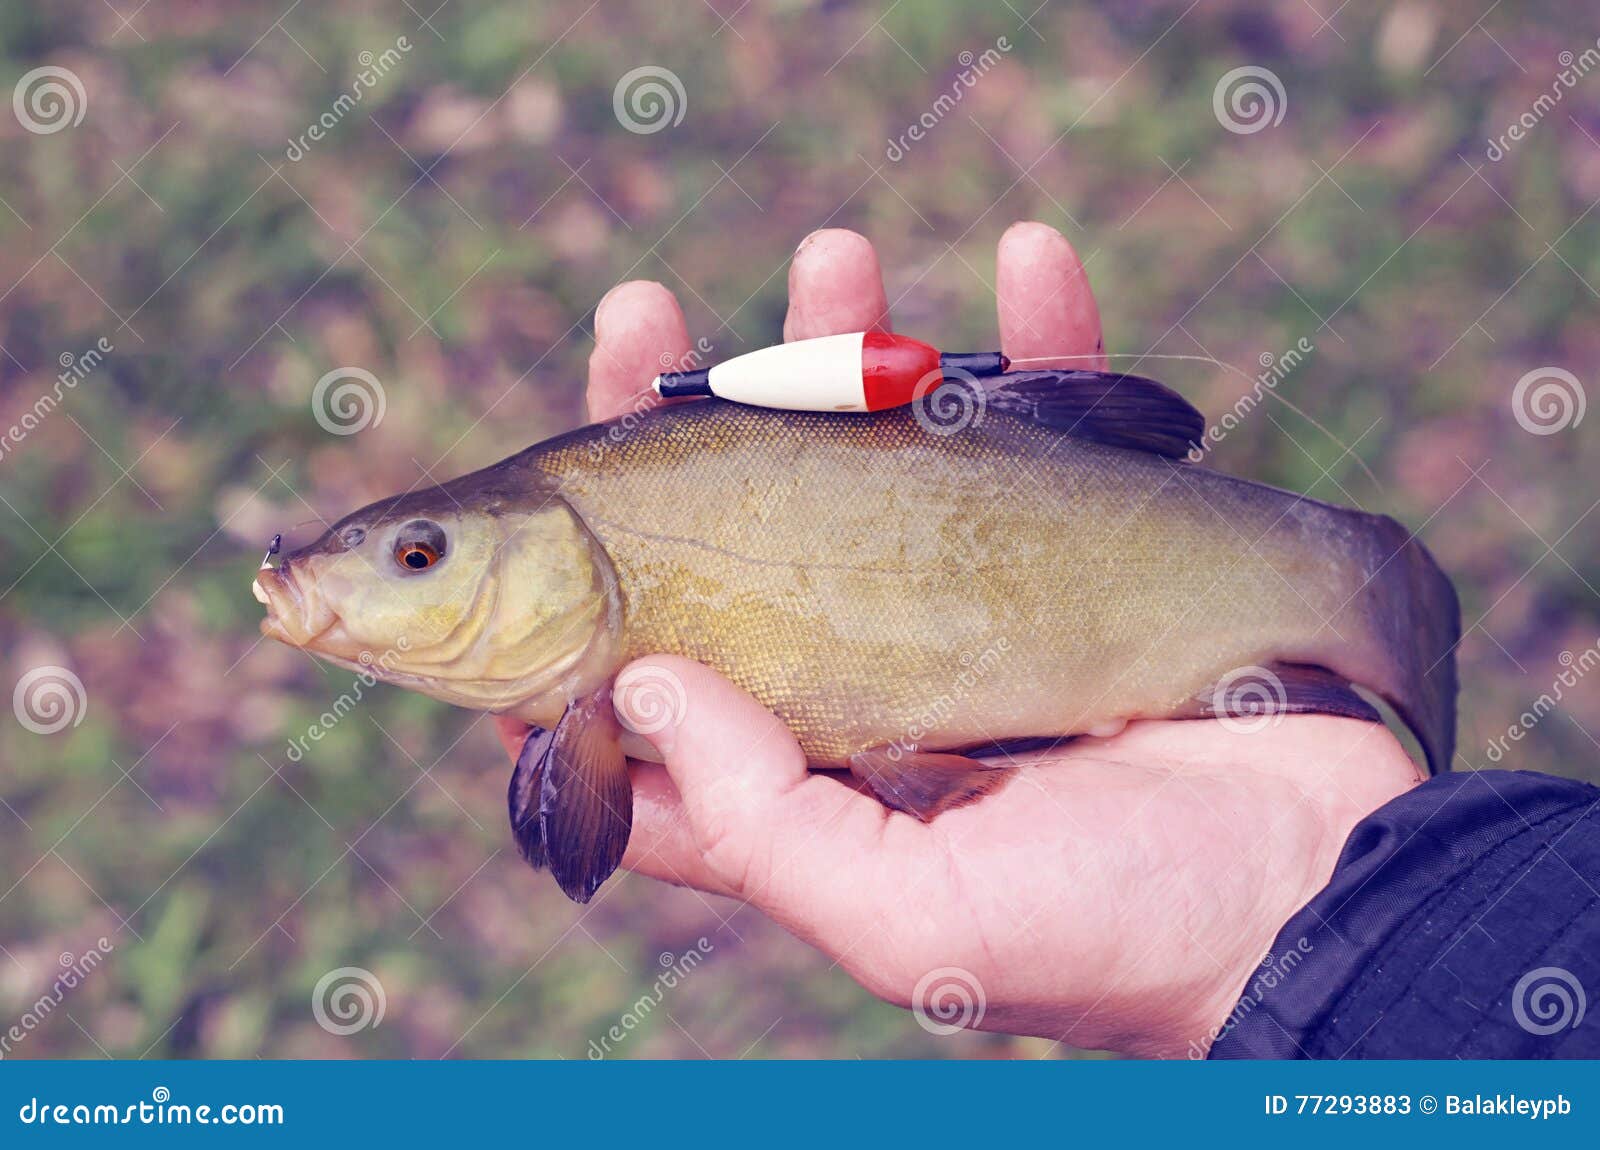 Tench fish stock image. Image of activity, hand, nature - 77293883